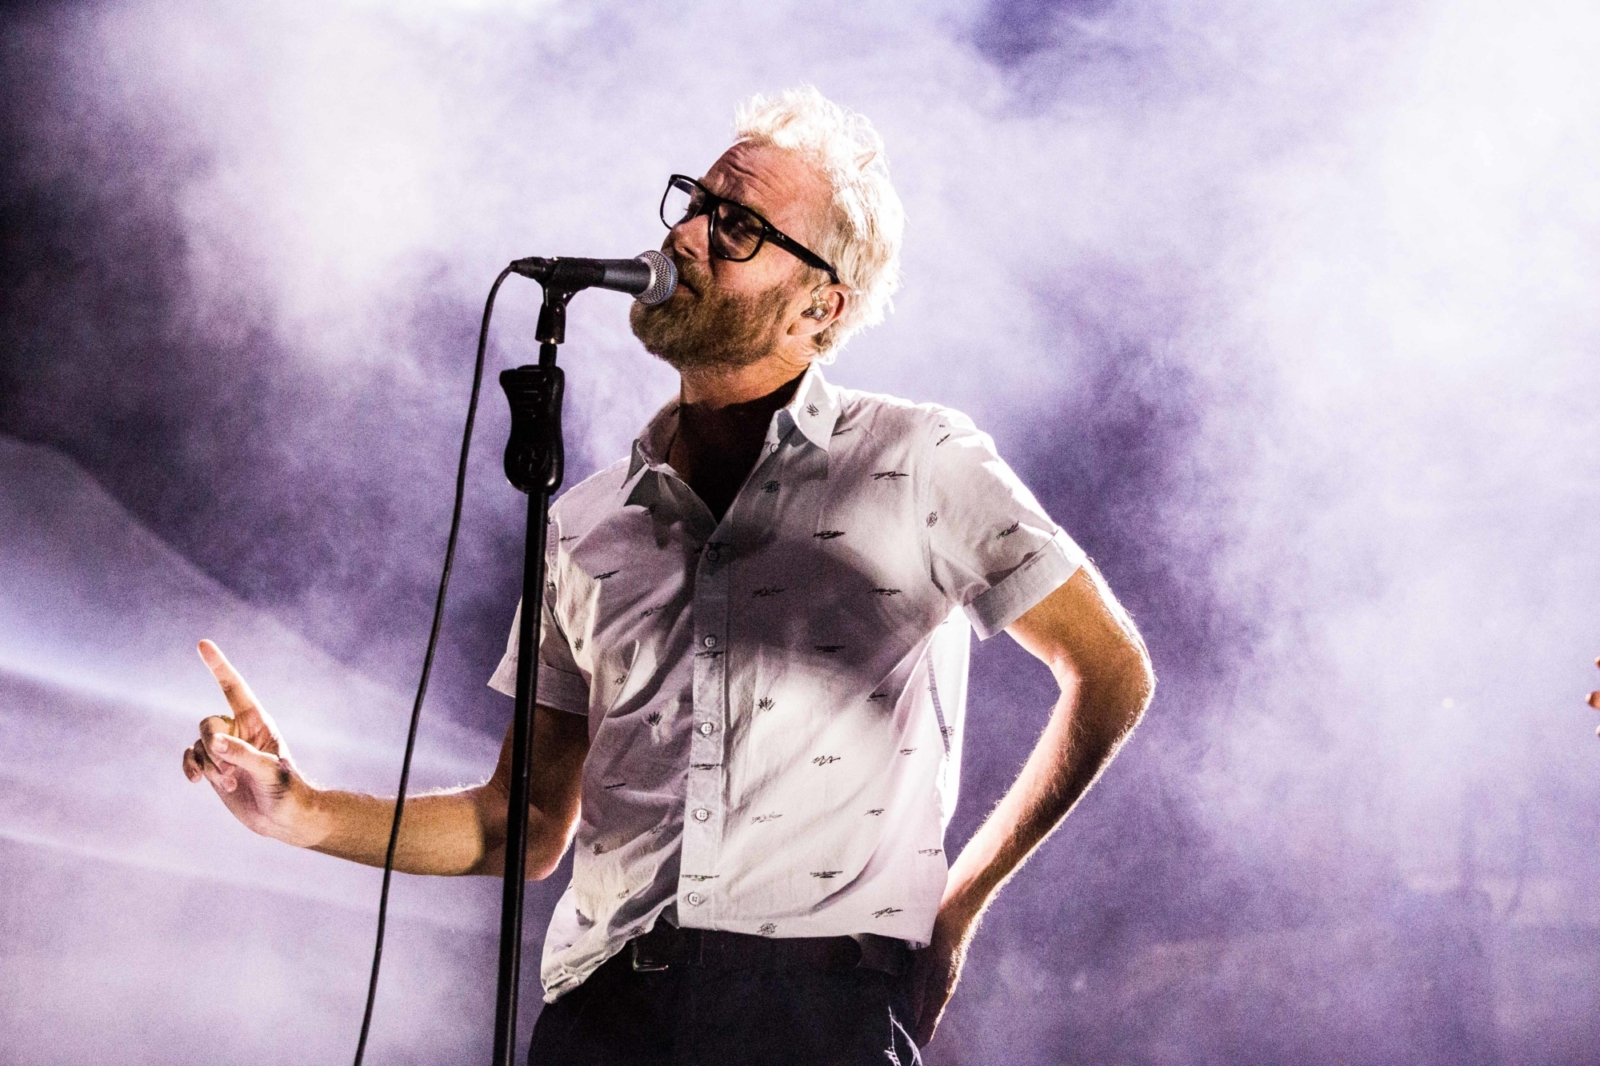 The National, Whitney and Spirtualized bring the magic to Ypsigrock 2019